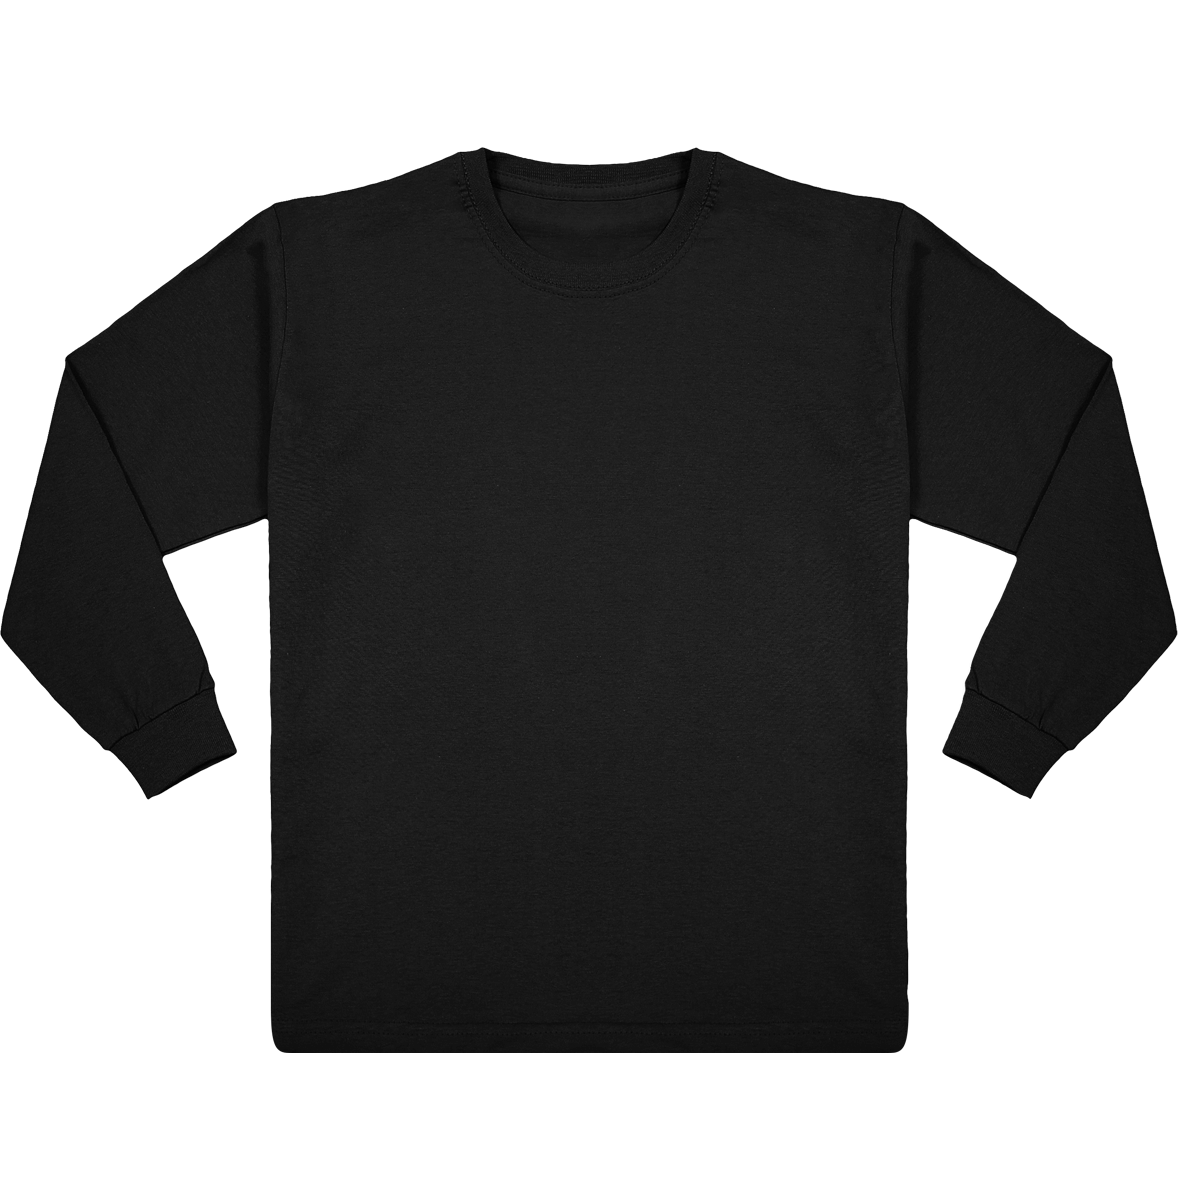 Long-Sleeved T-Shirt For Children To Customize Black